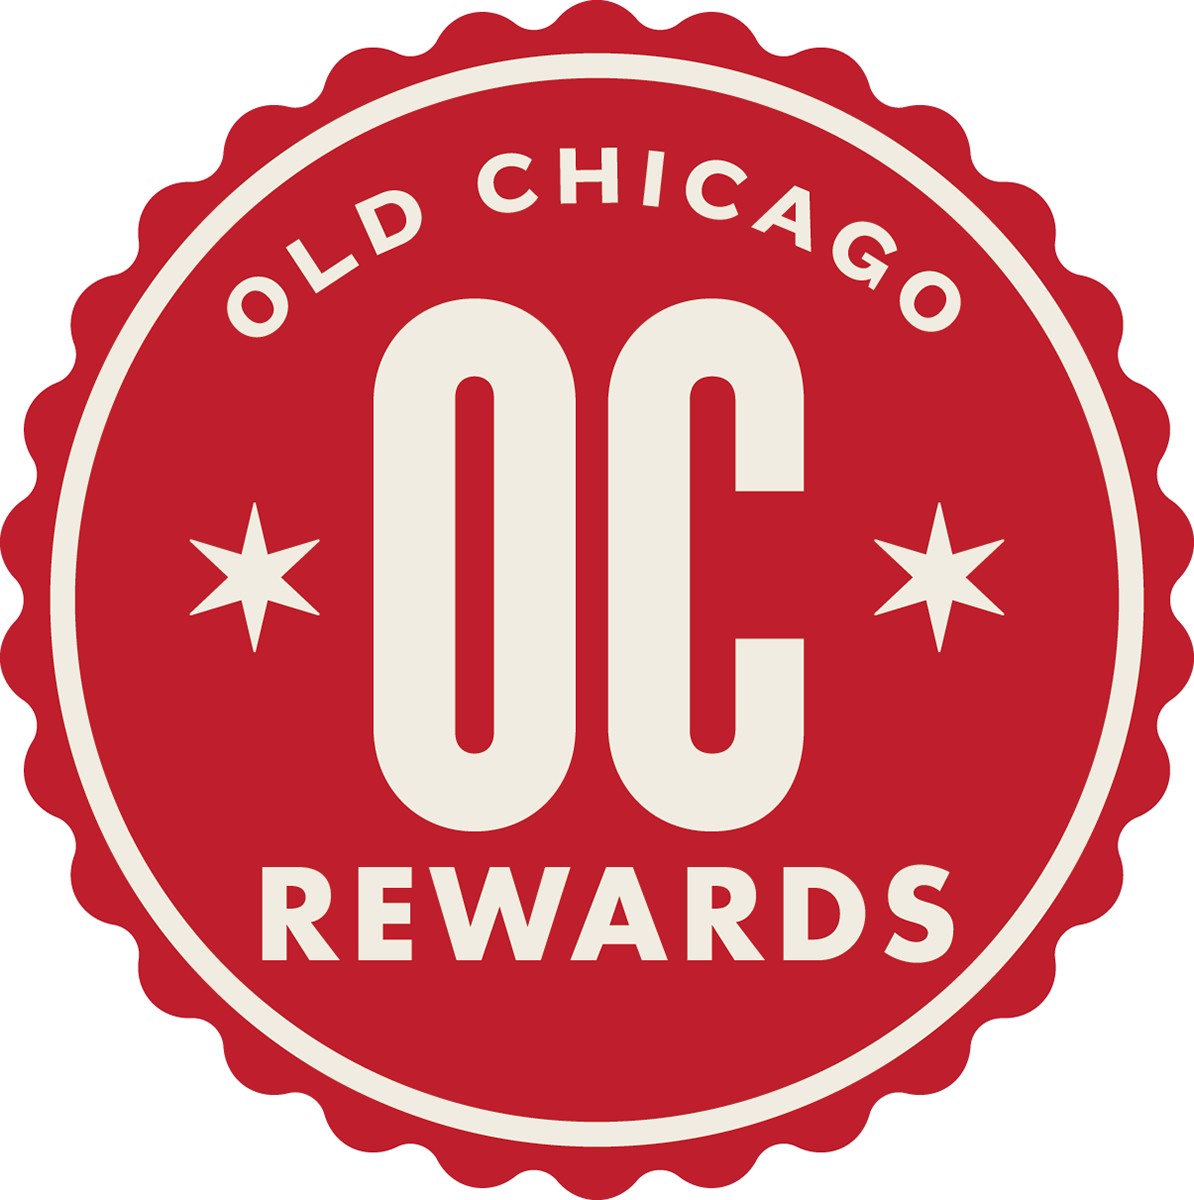 Old Chicago Pizza and Taproom Coupons near me in Ankeny, IA 50021